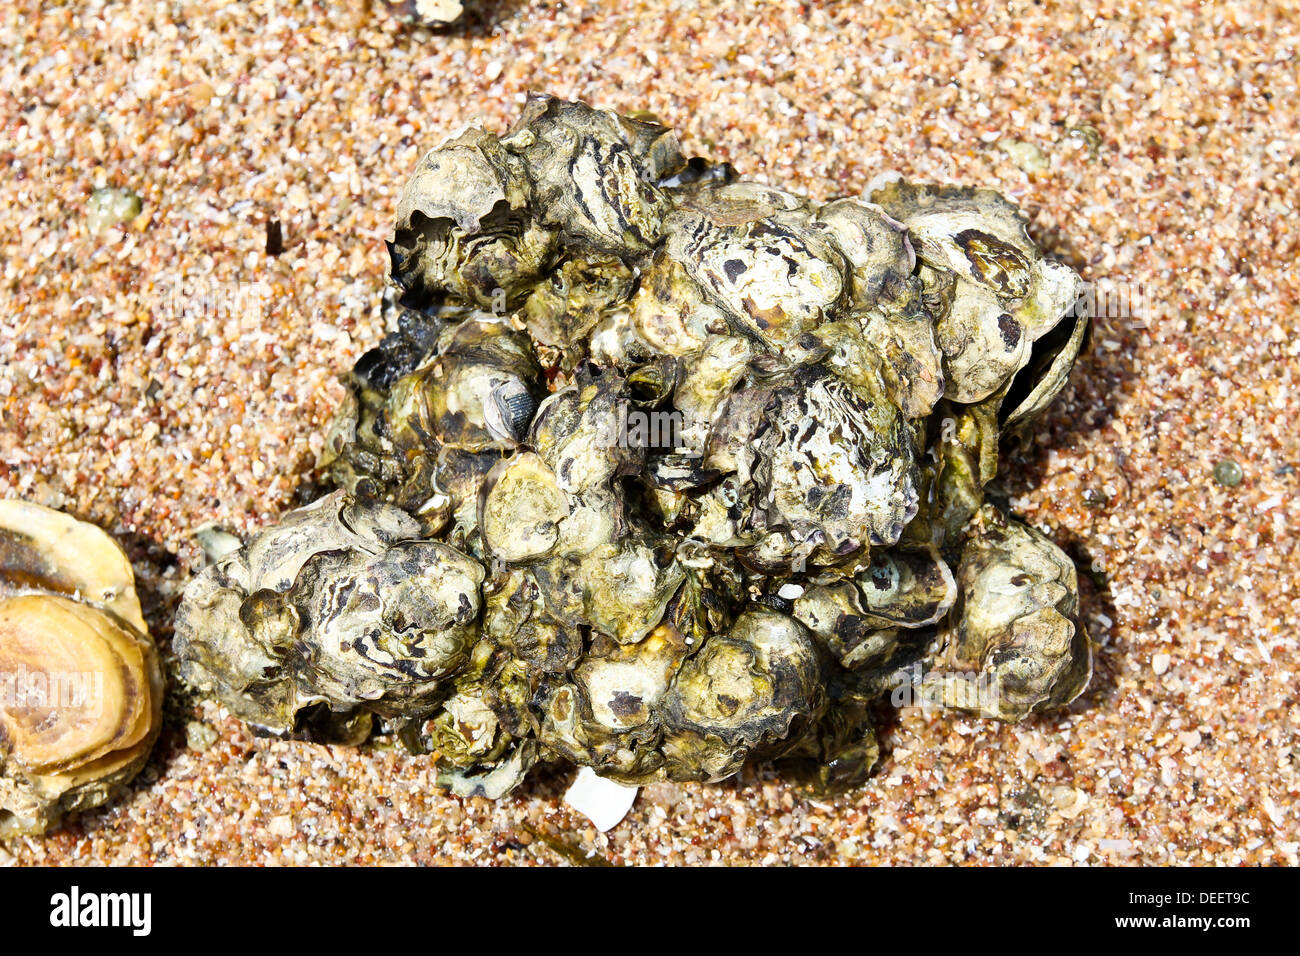 Rock solid shell on the beach. Stock Photo